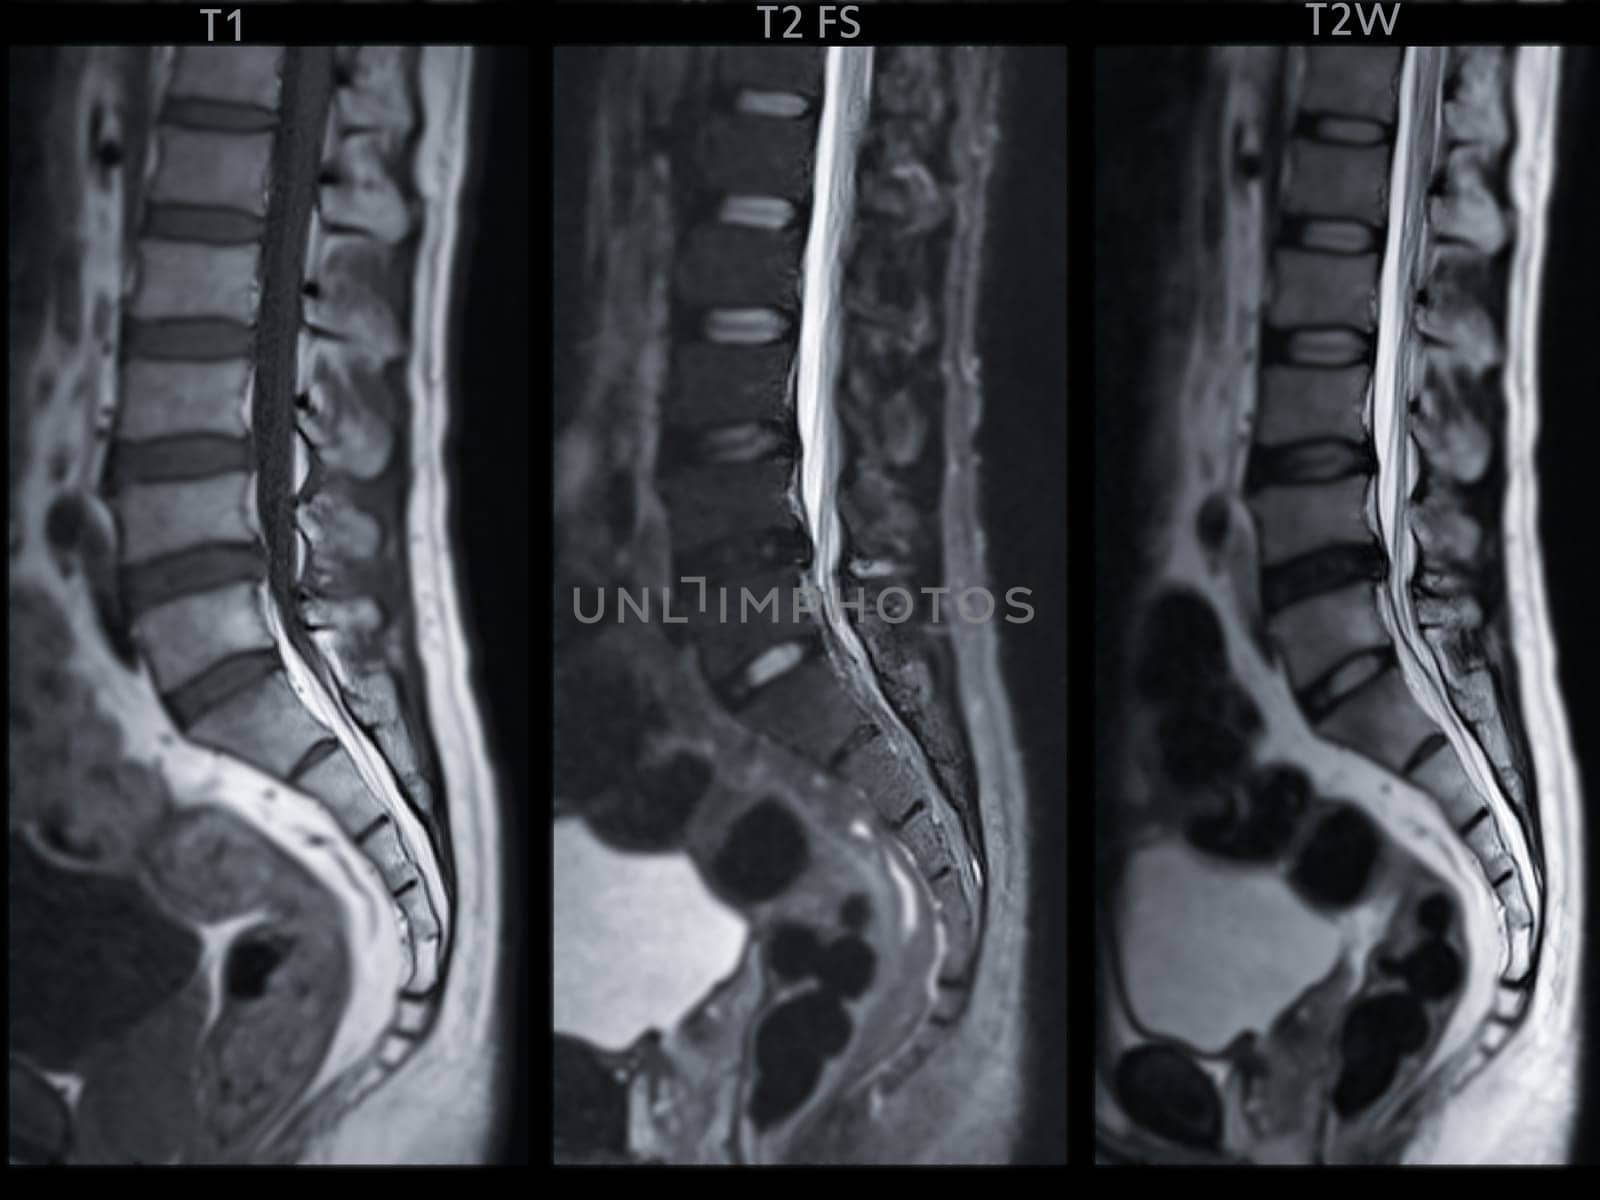 MRI L-S spine or lumbar spine Sagittall T1W ,T2 FS and T2W view  for diagnosis spinal cord compression. by samunella